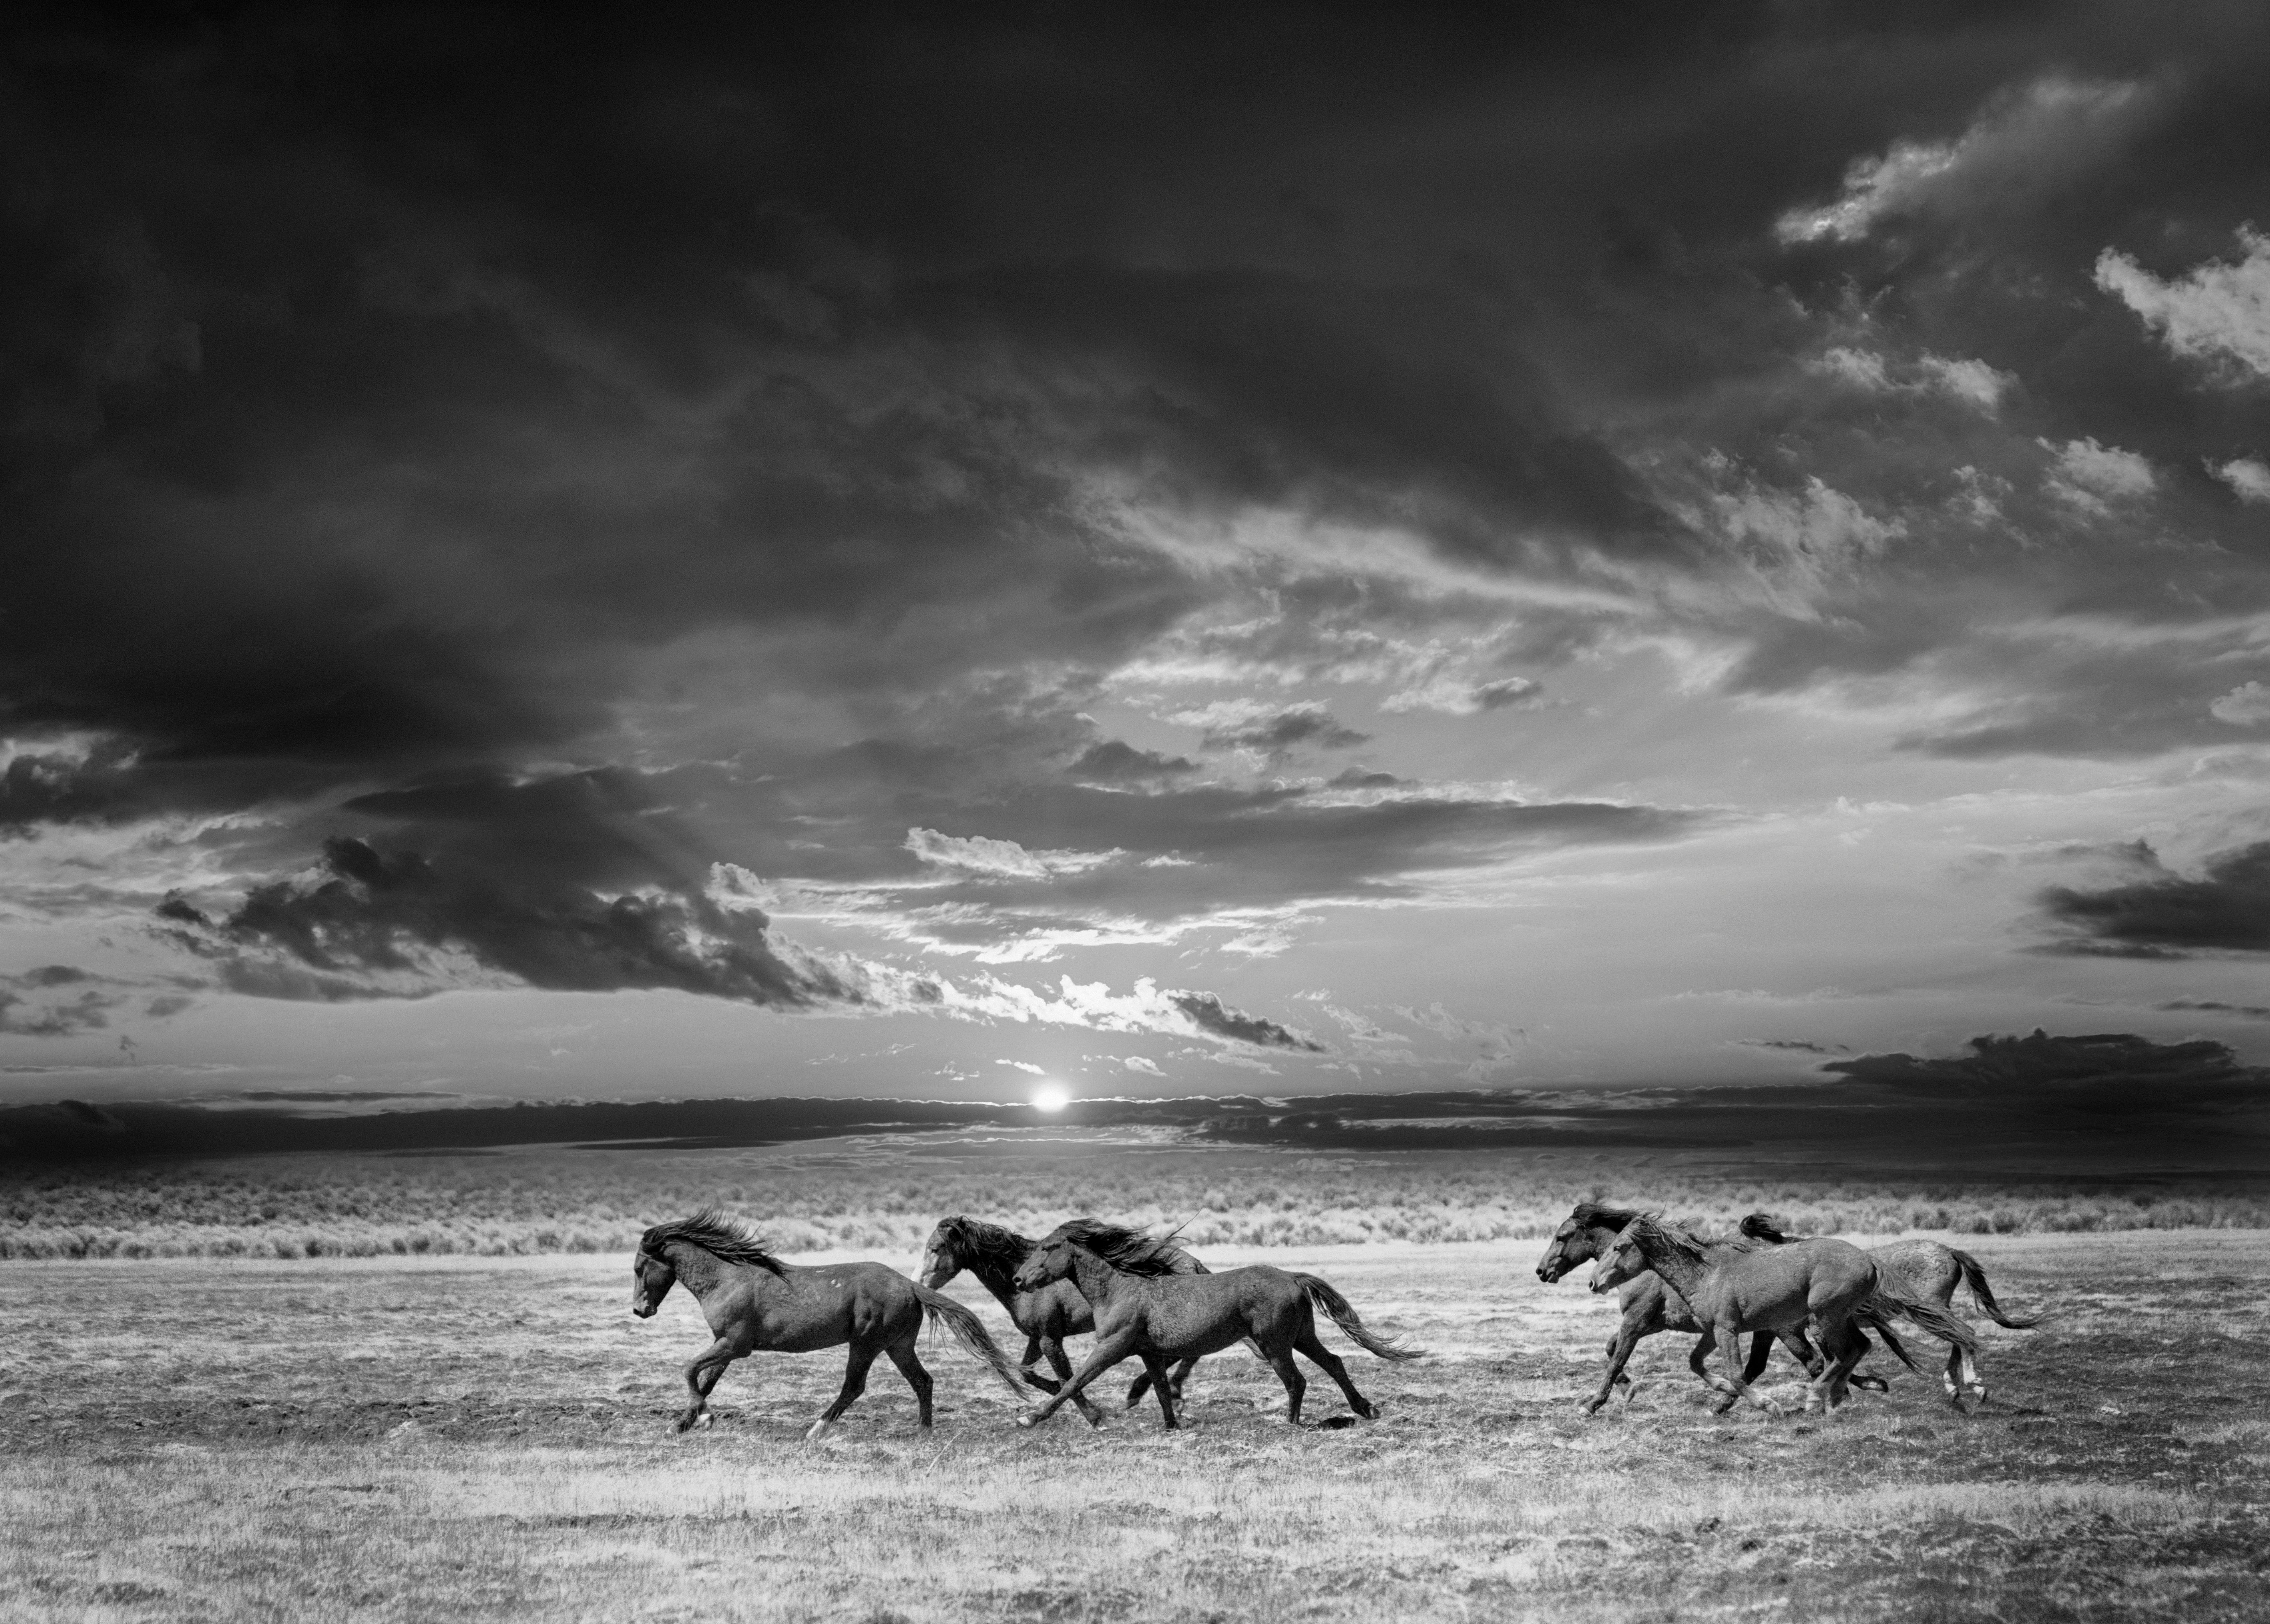 Shane Russeck Animal Print - Mustangs Photography of Wild Horses Unsigned Photograph Chasing the Light 36x48